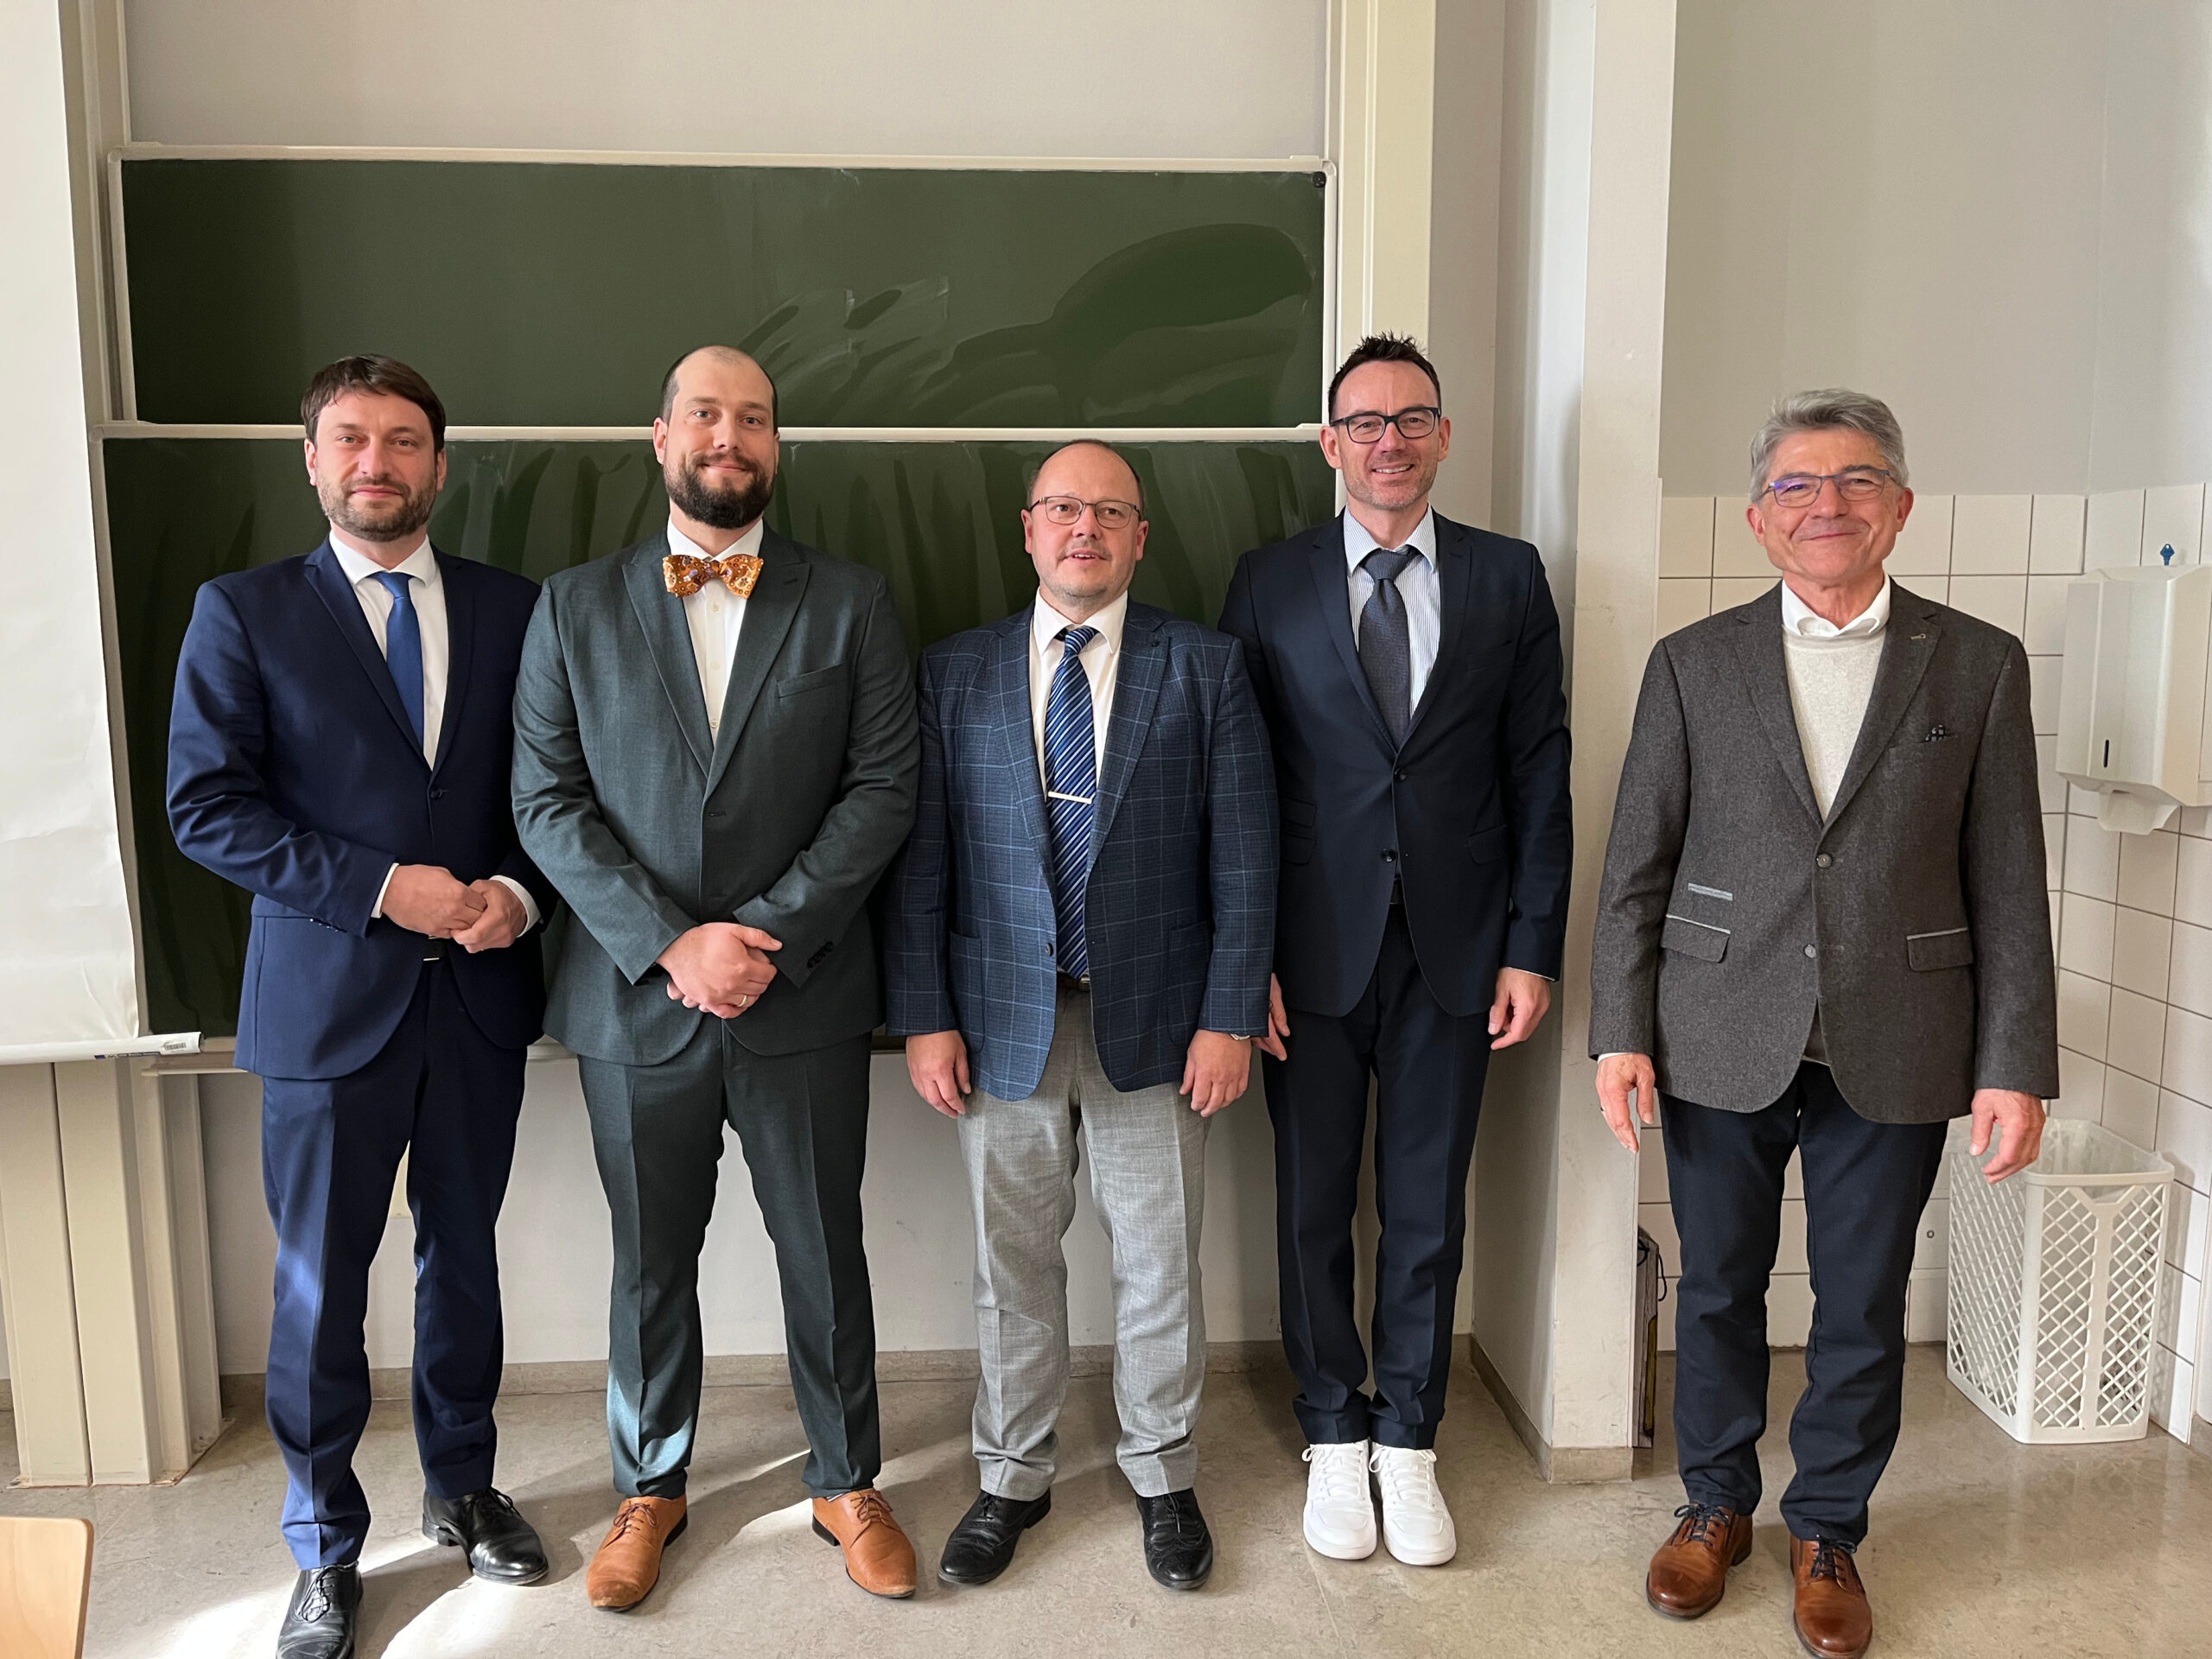 PhD defense in the topic of feather key connections